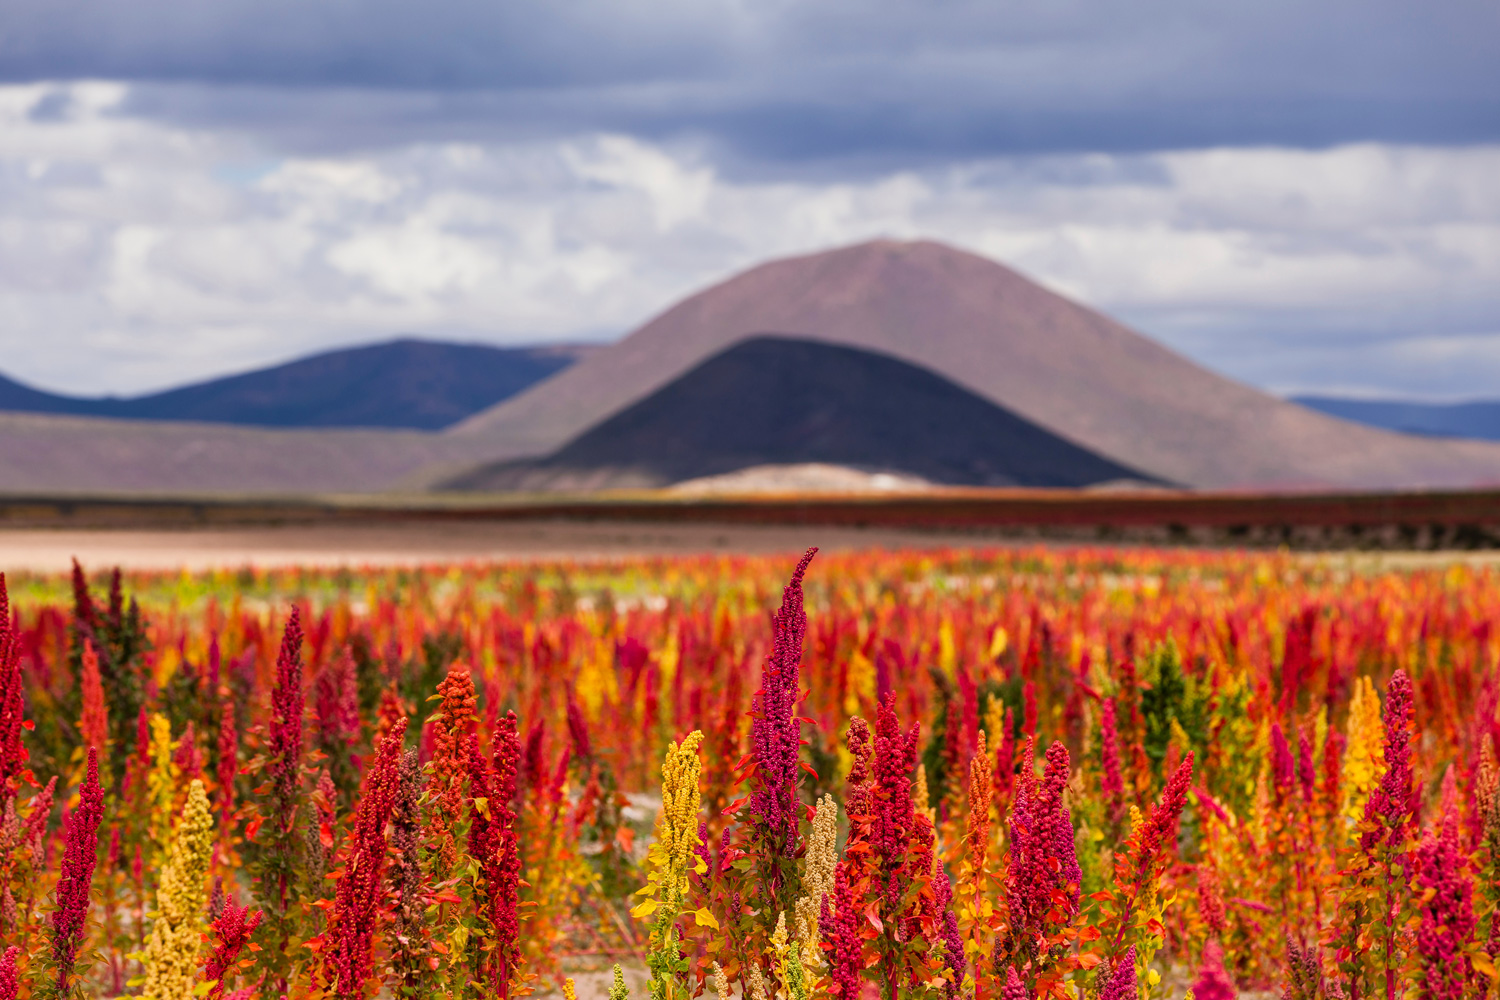 Quinoa Fields Ready For Harvest On tHE Bolivian Altiplano